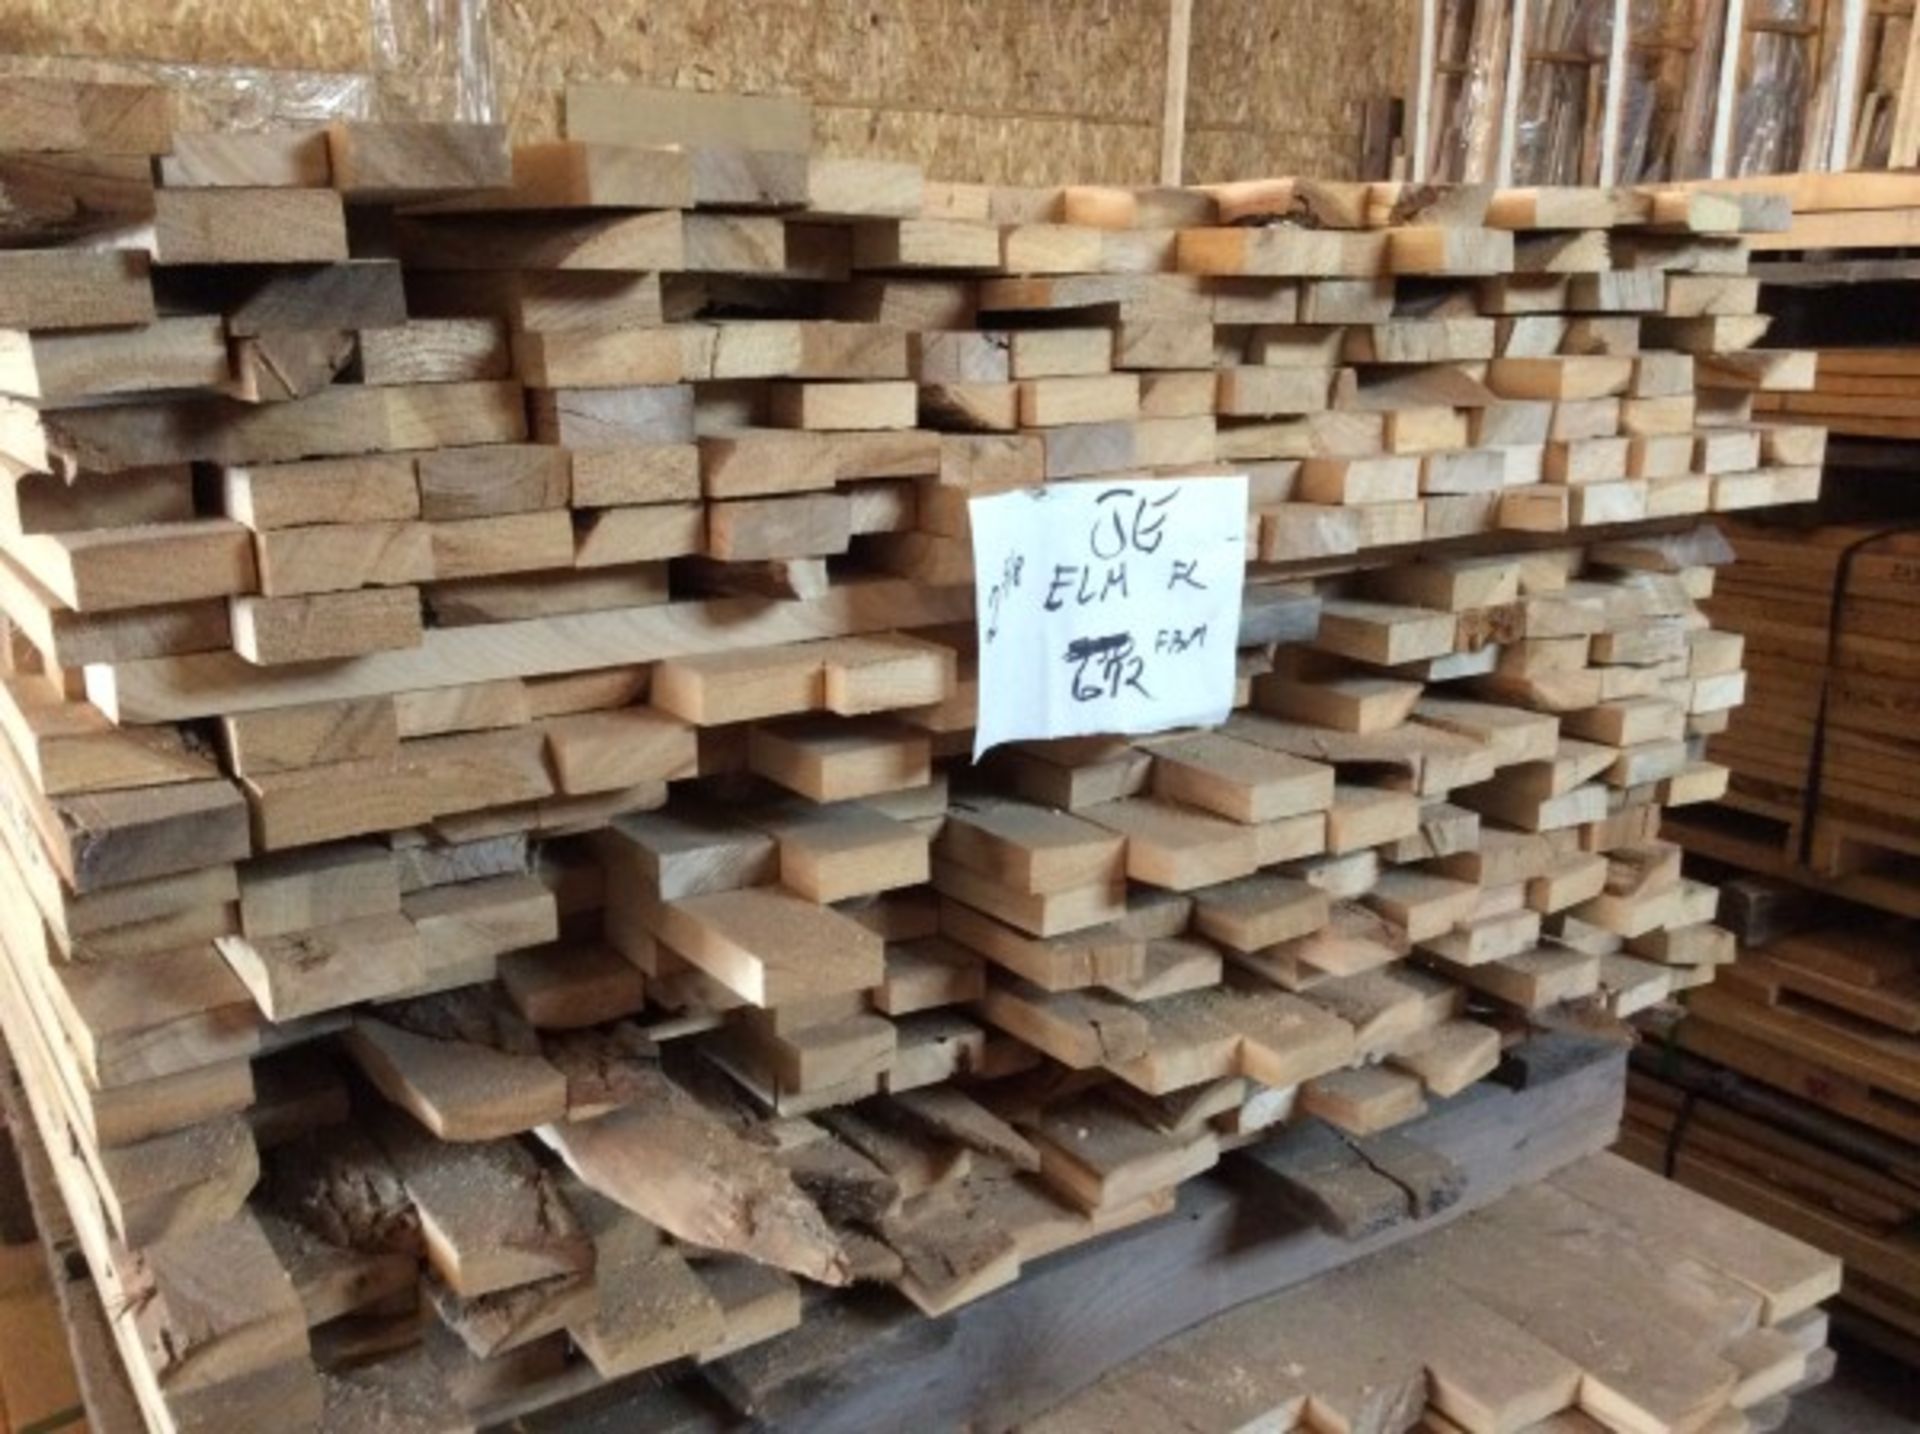 2 SKID LIFTS OF ELM ROUGH CUT LUMBER - APPROX 425 PCS - A - Image 4 of 4